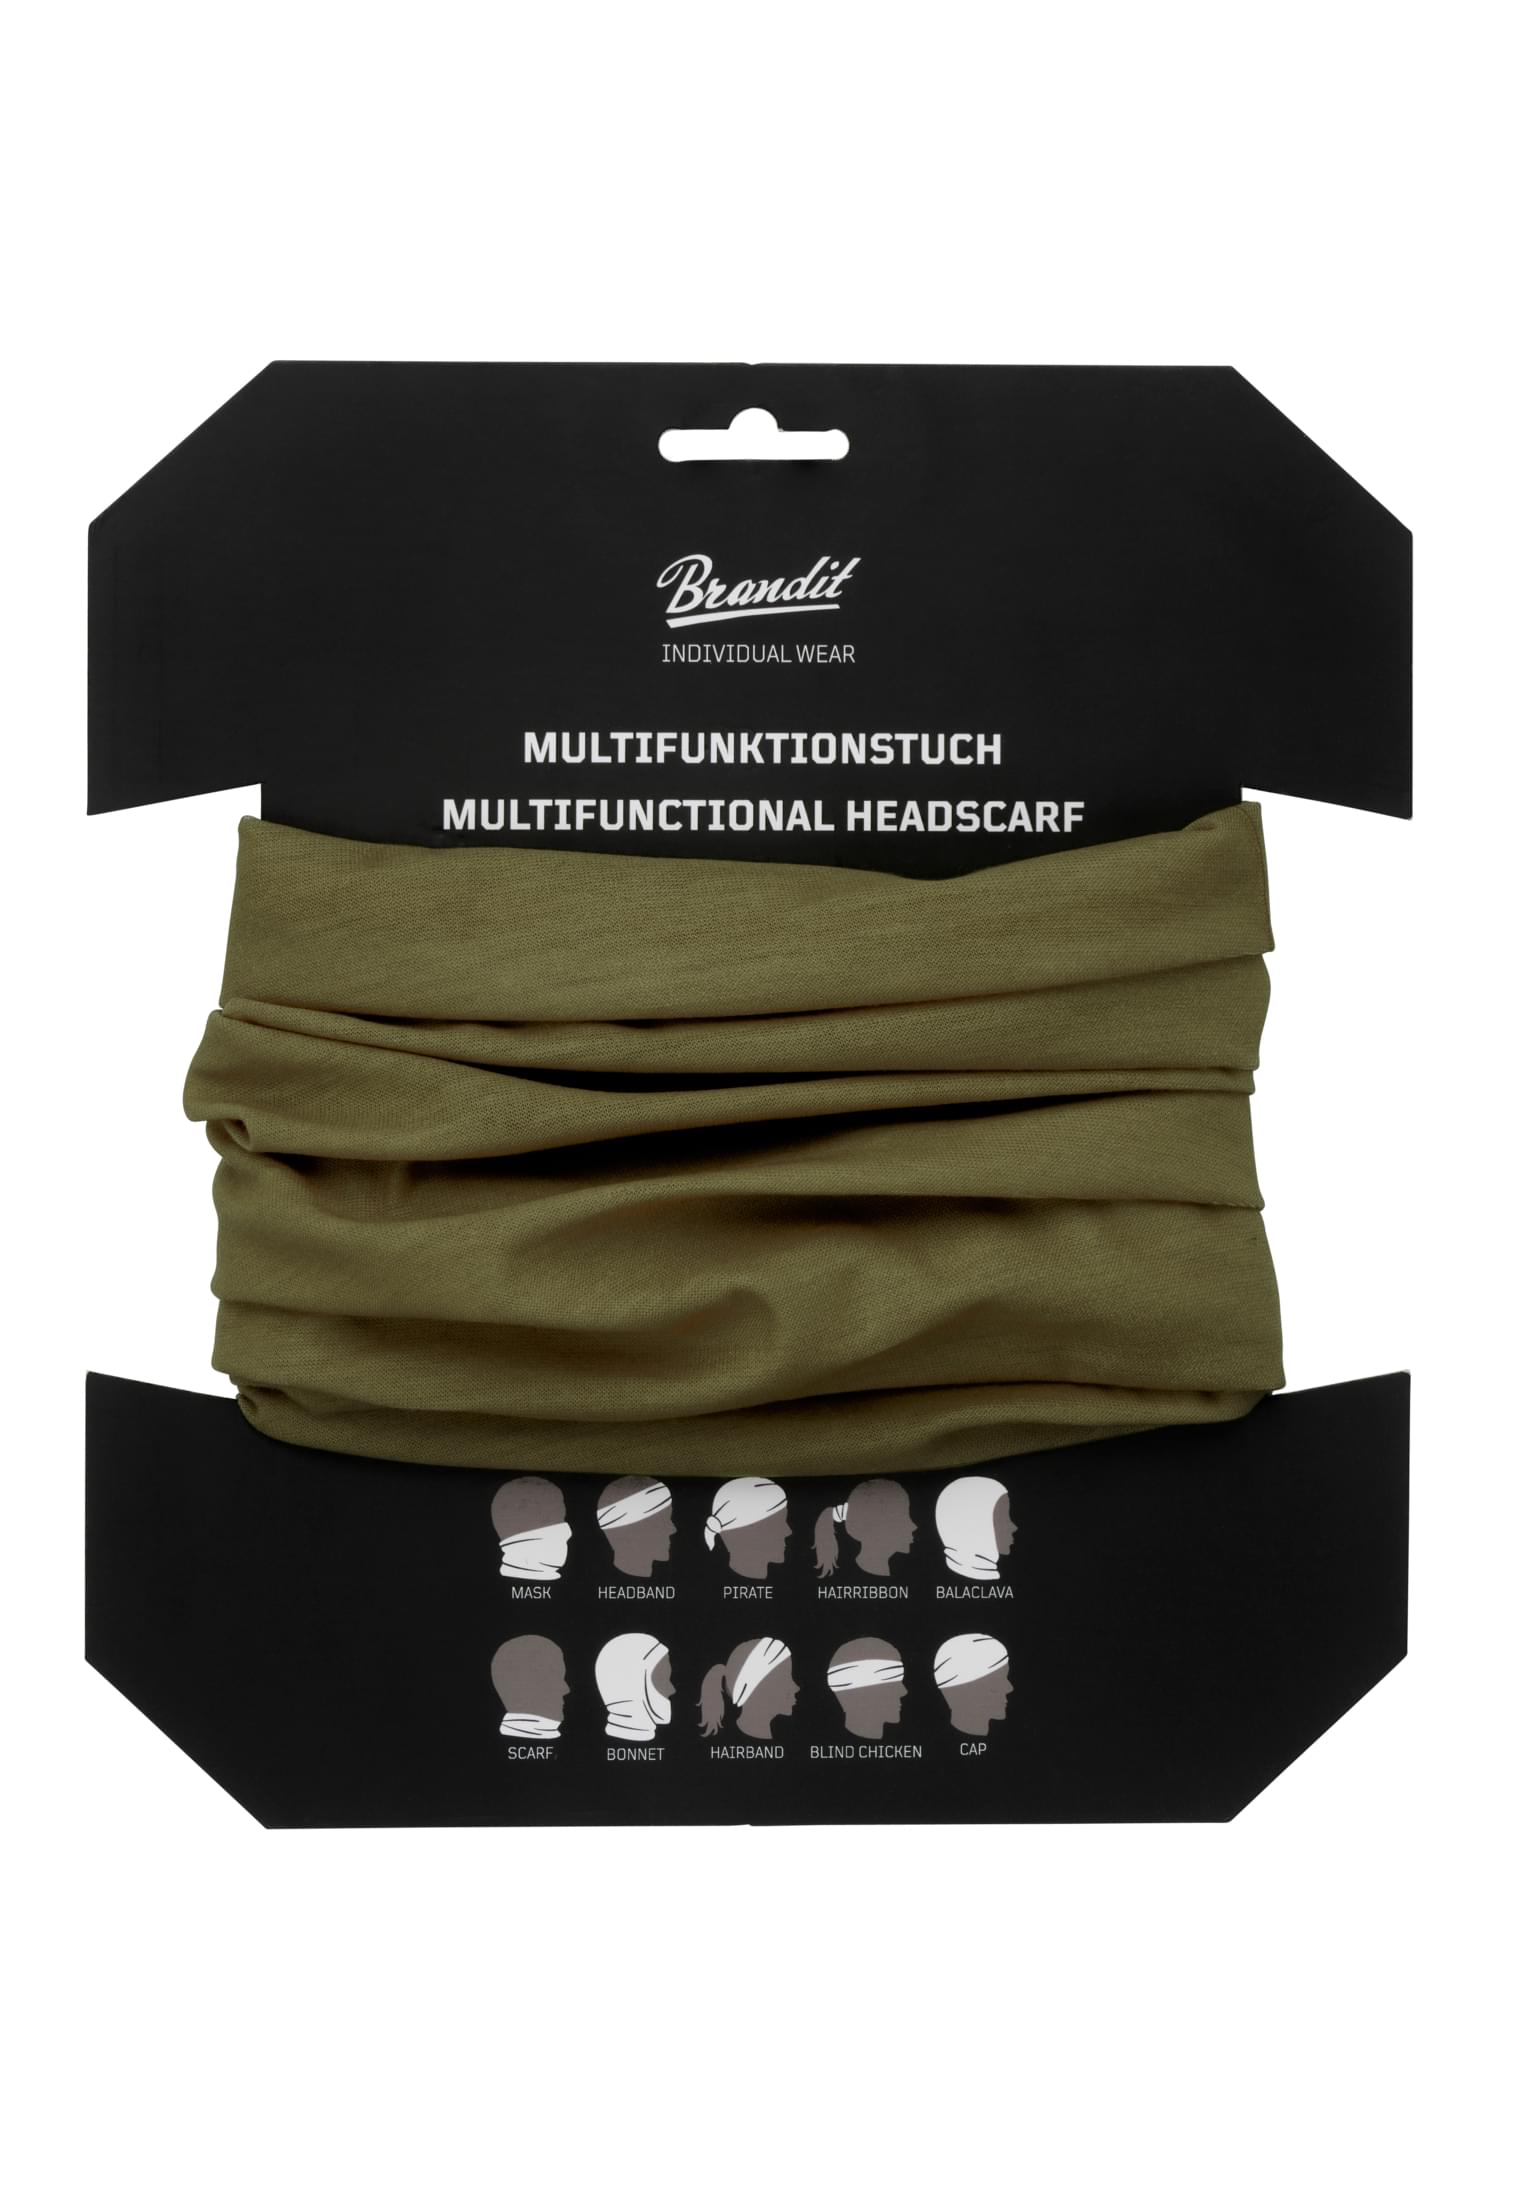 Accessoires Multifunktionstuch in Farbe olive